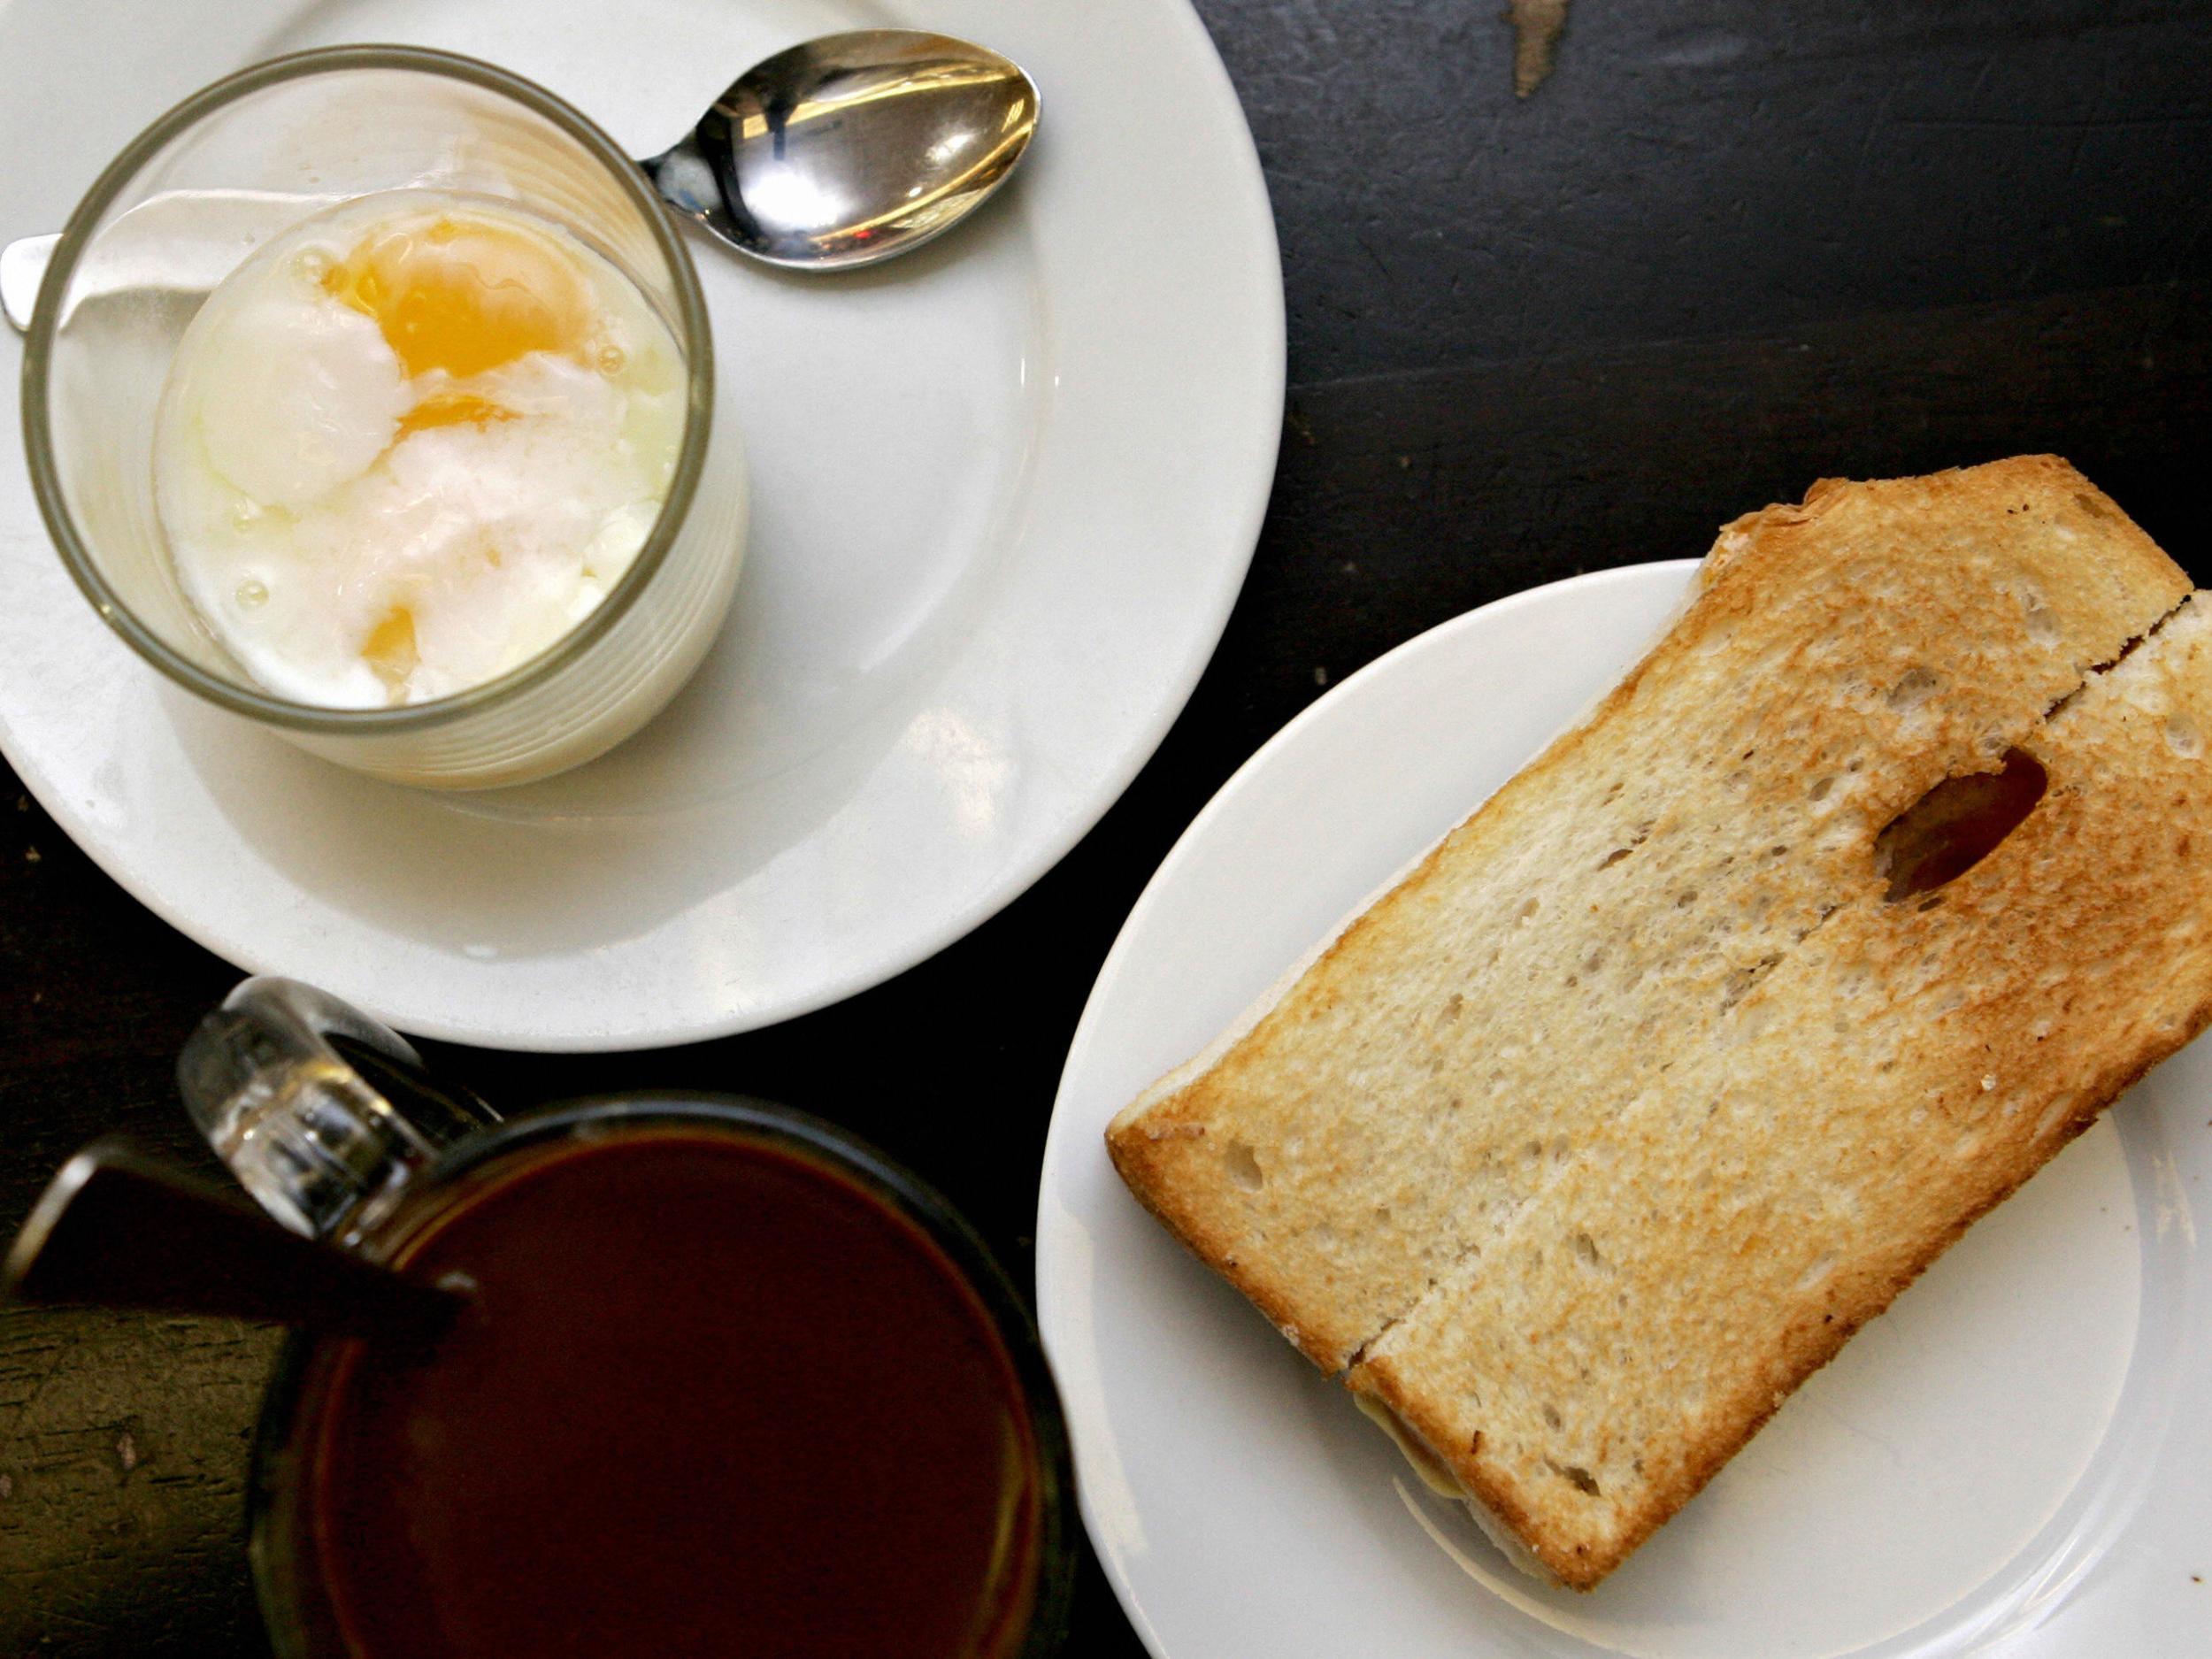 Tea and toast may go as part of a consultation into cost cutting measures